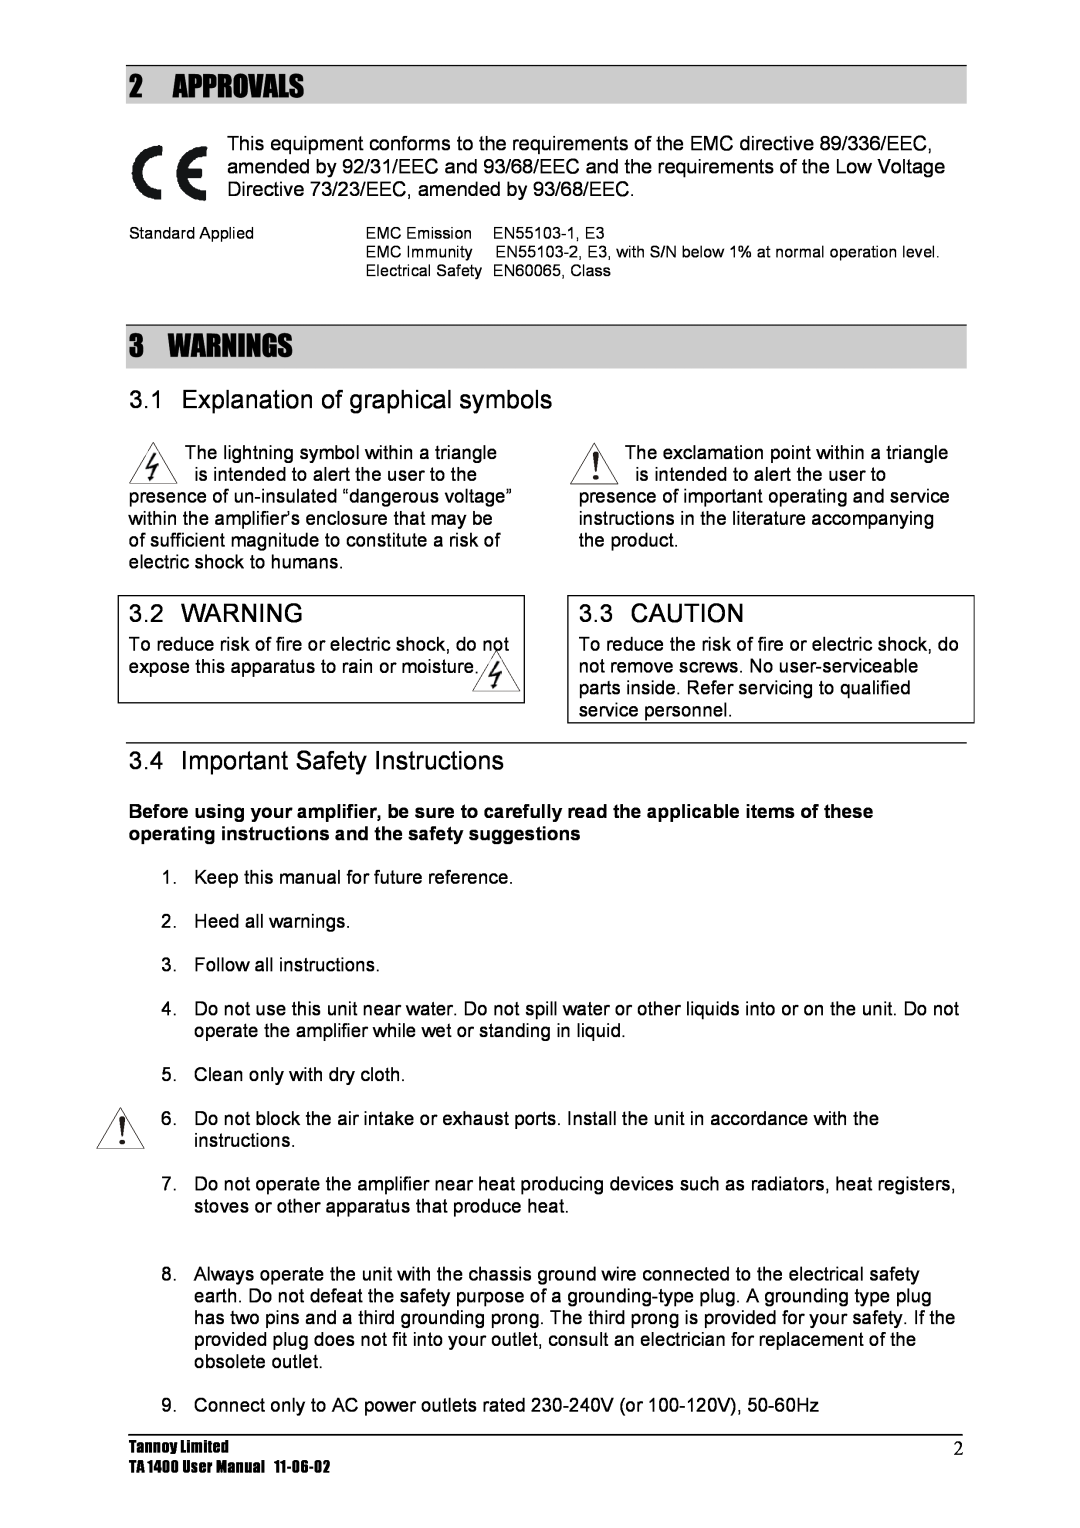 TOA Electronics TA 1400 user manual Approvals, Warnings, Explanation of graphical symbols, Important Safety Instructions 